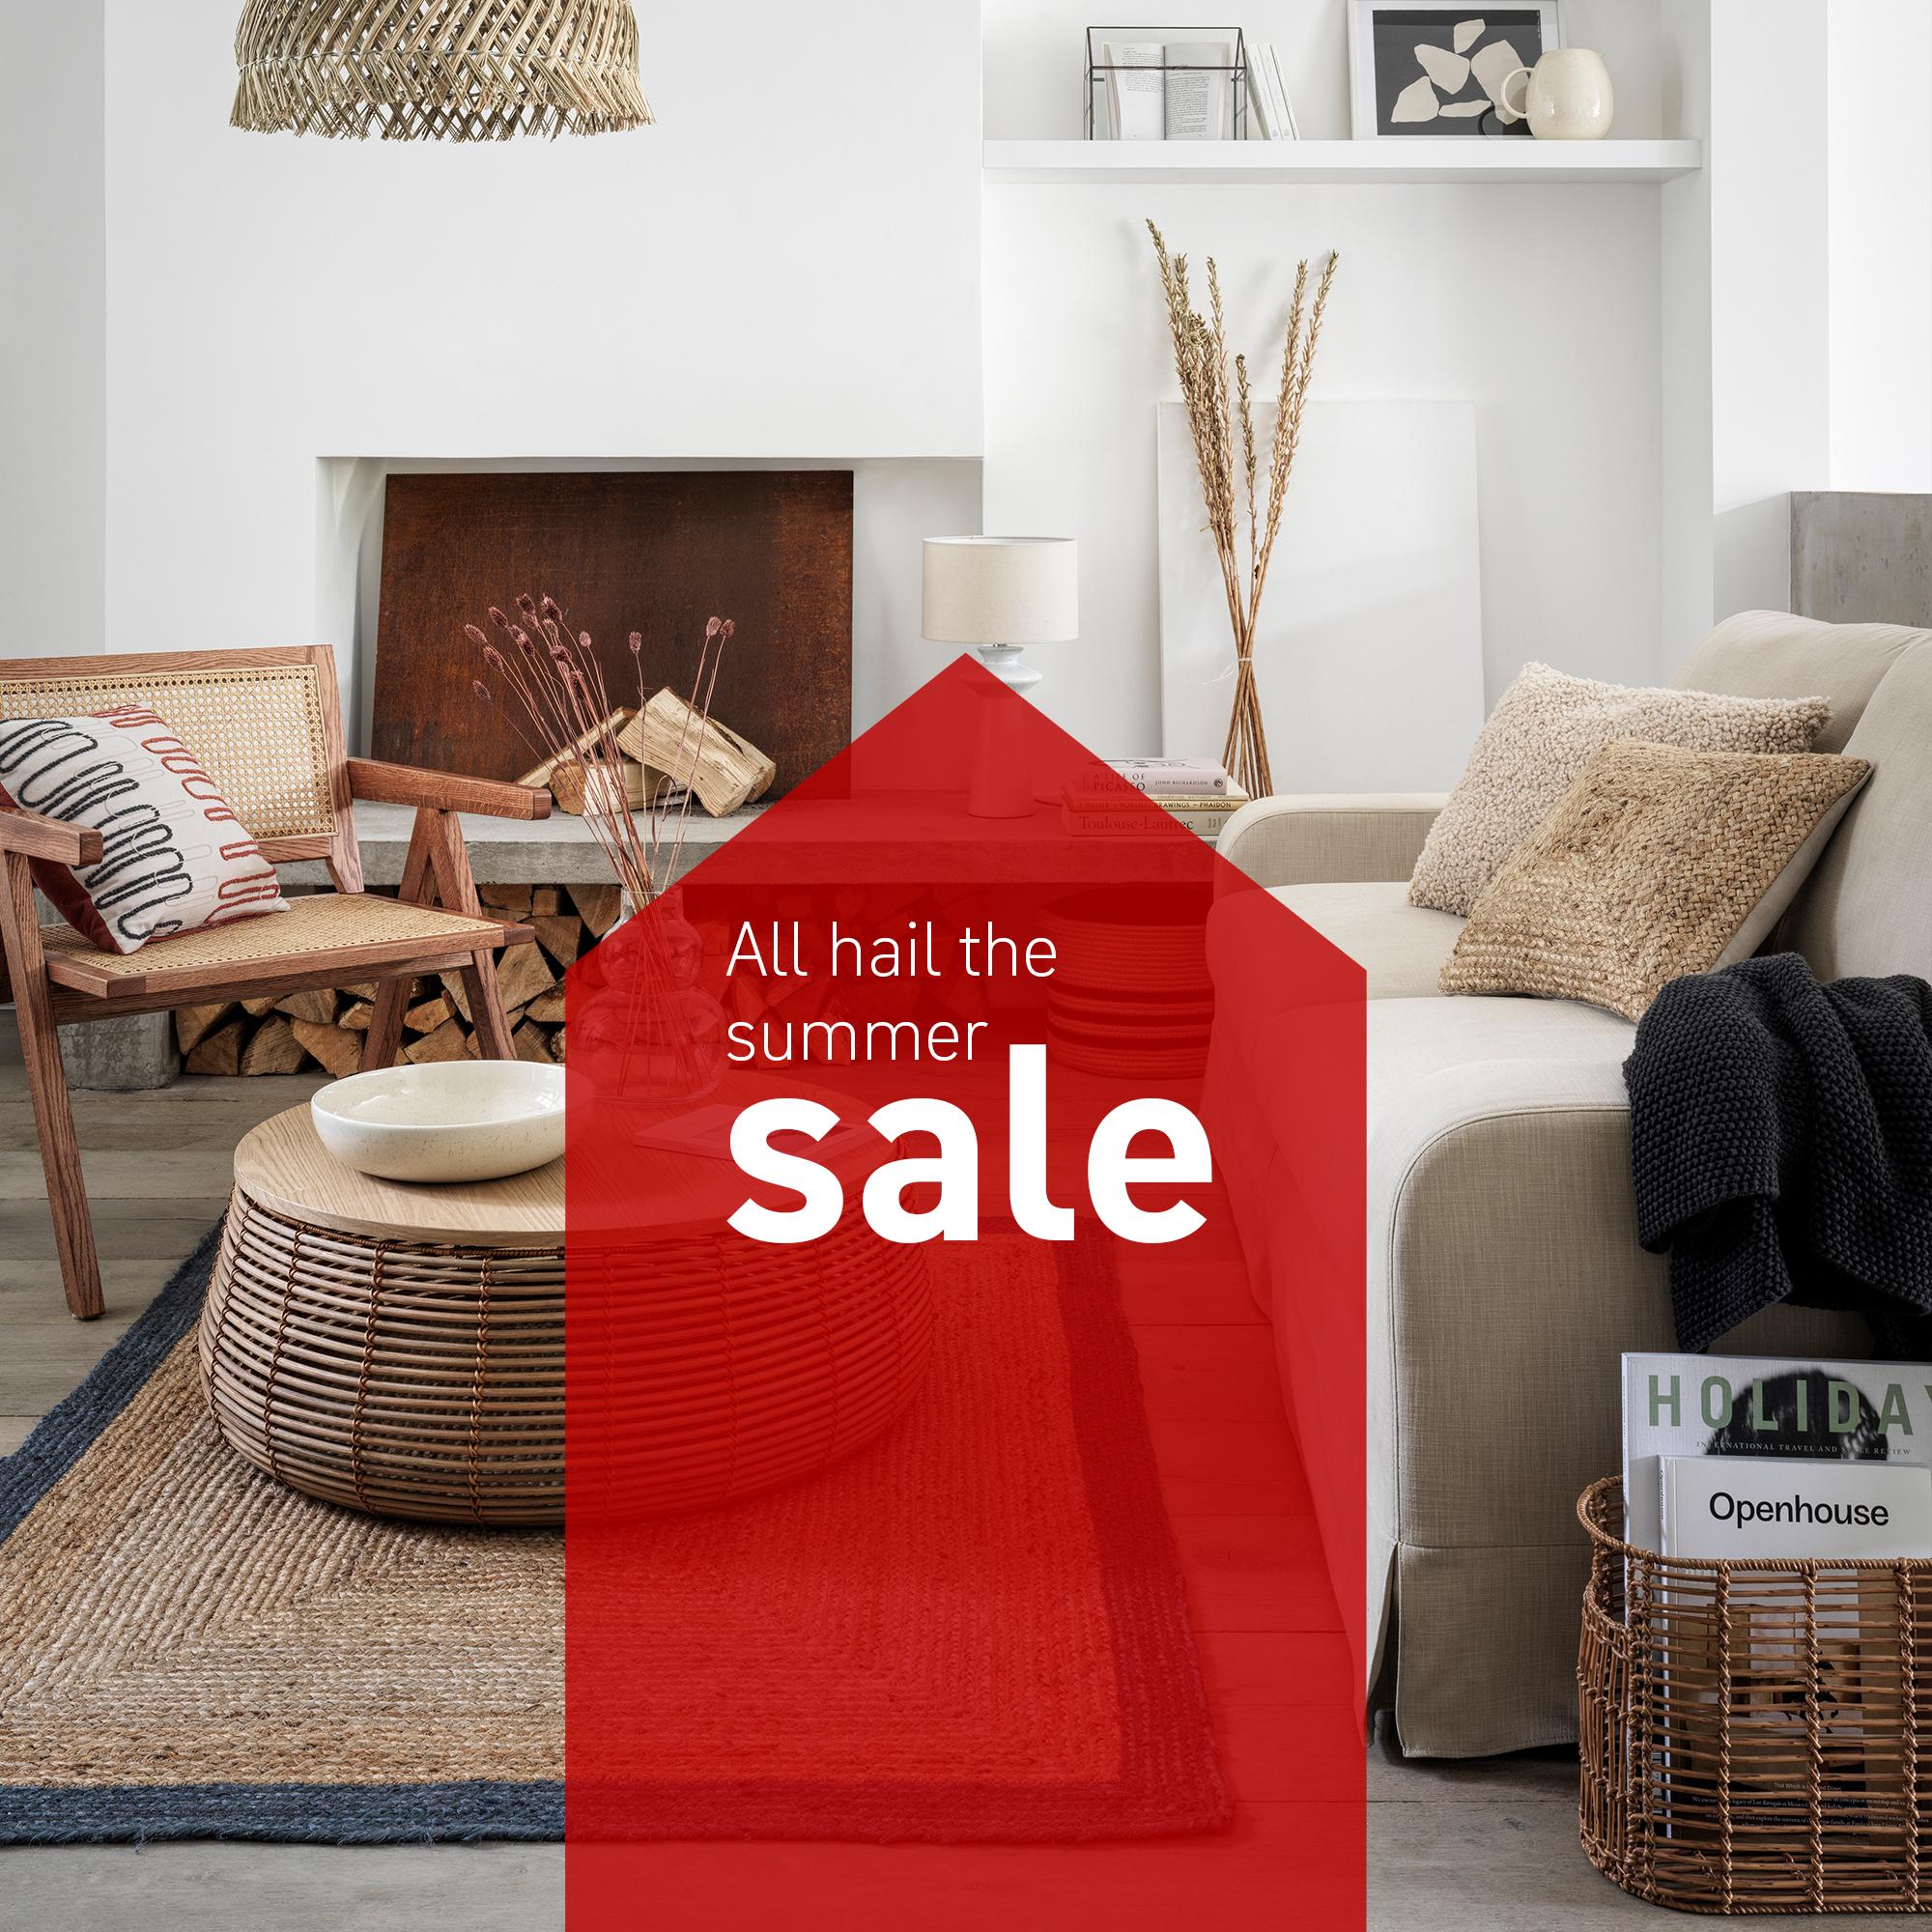 Save up to 1/3 on furniture - new lines added